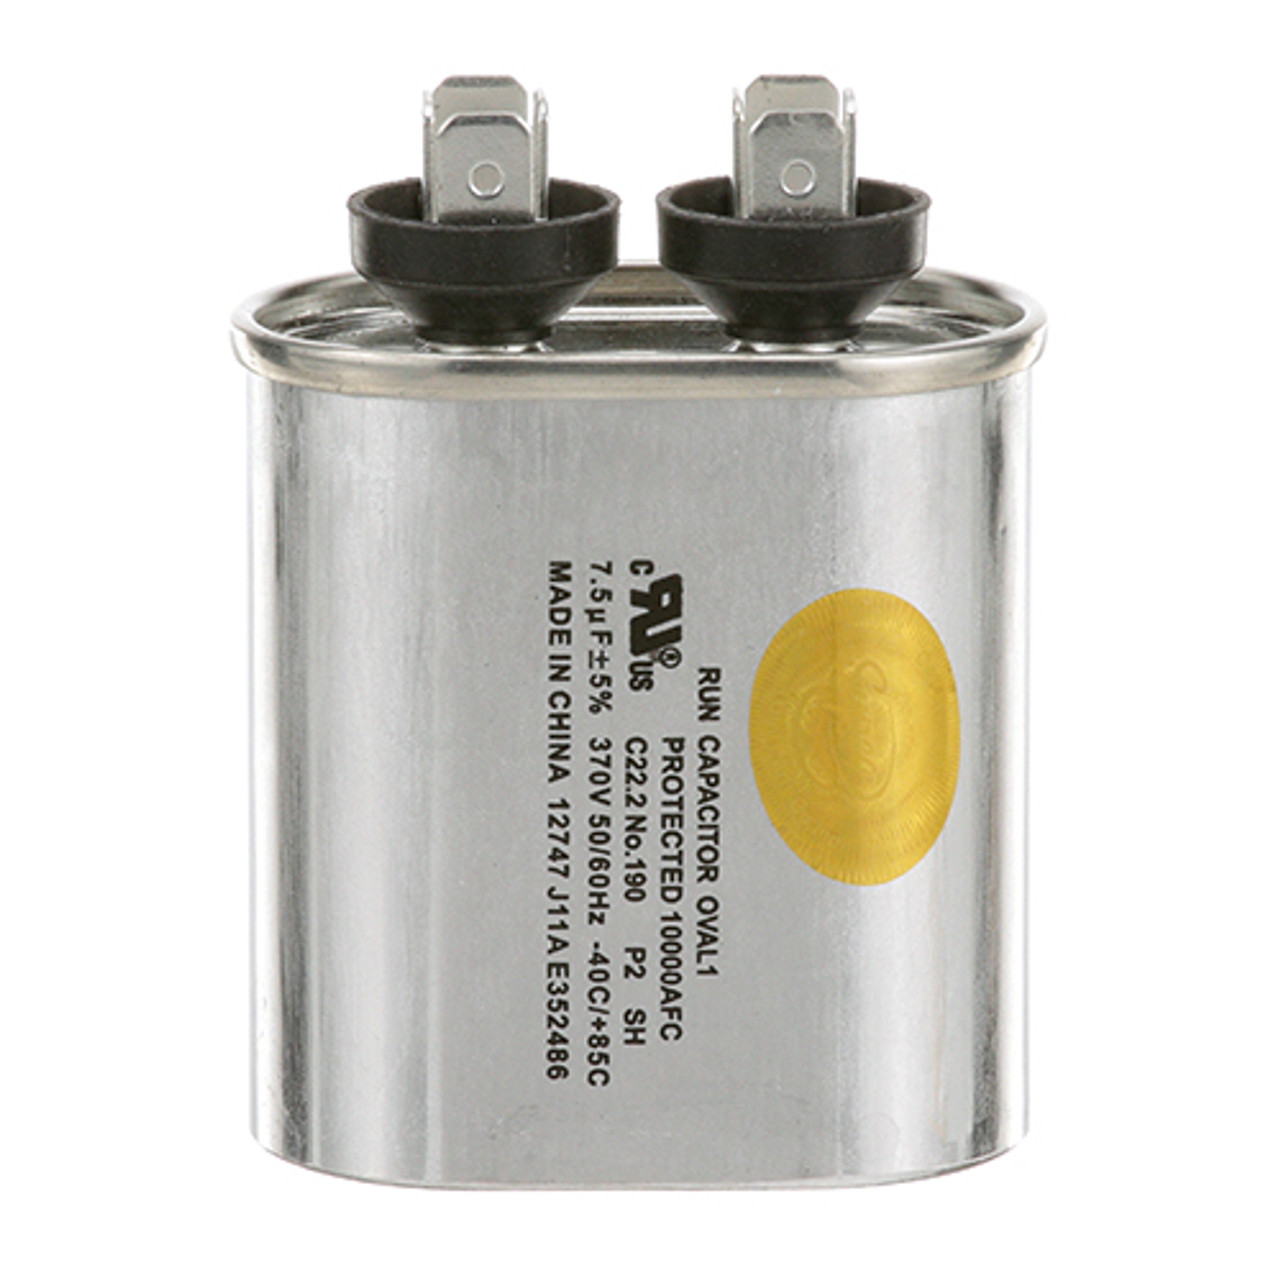 Capacitor - Replacement Part For Lincoln 369192